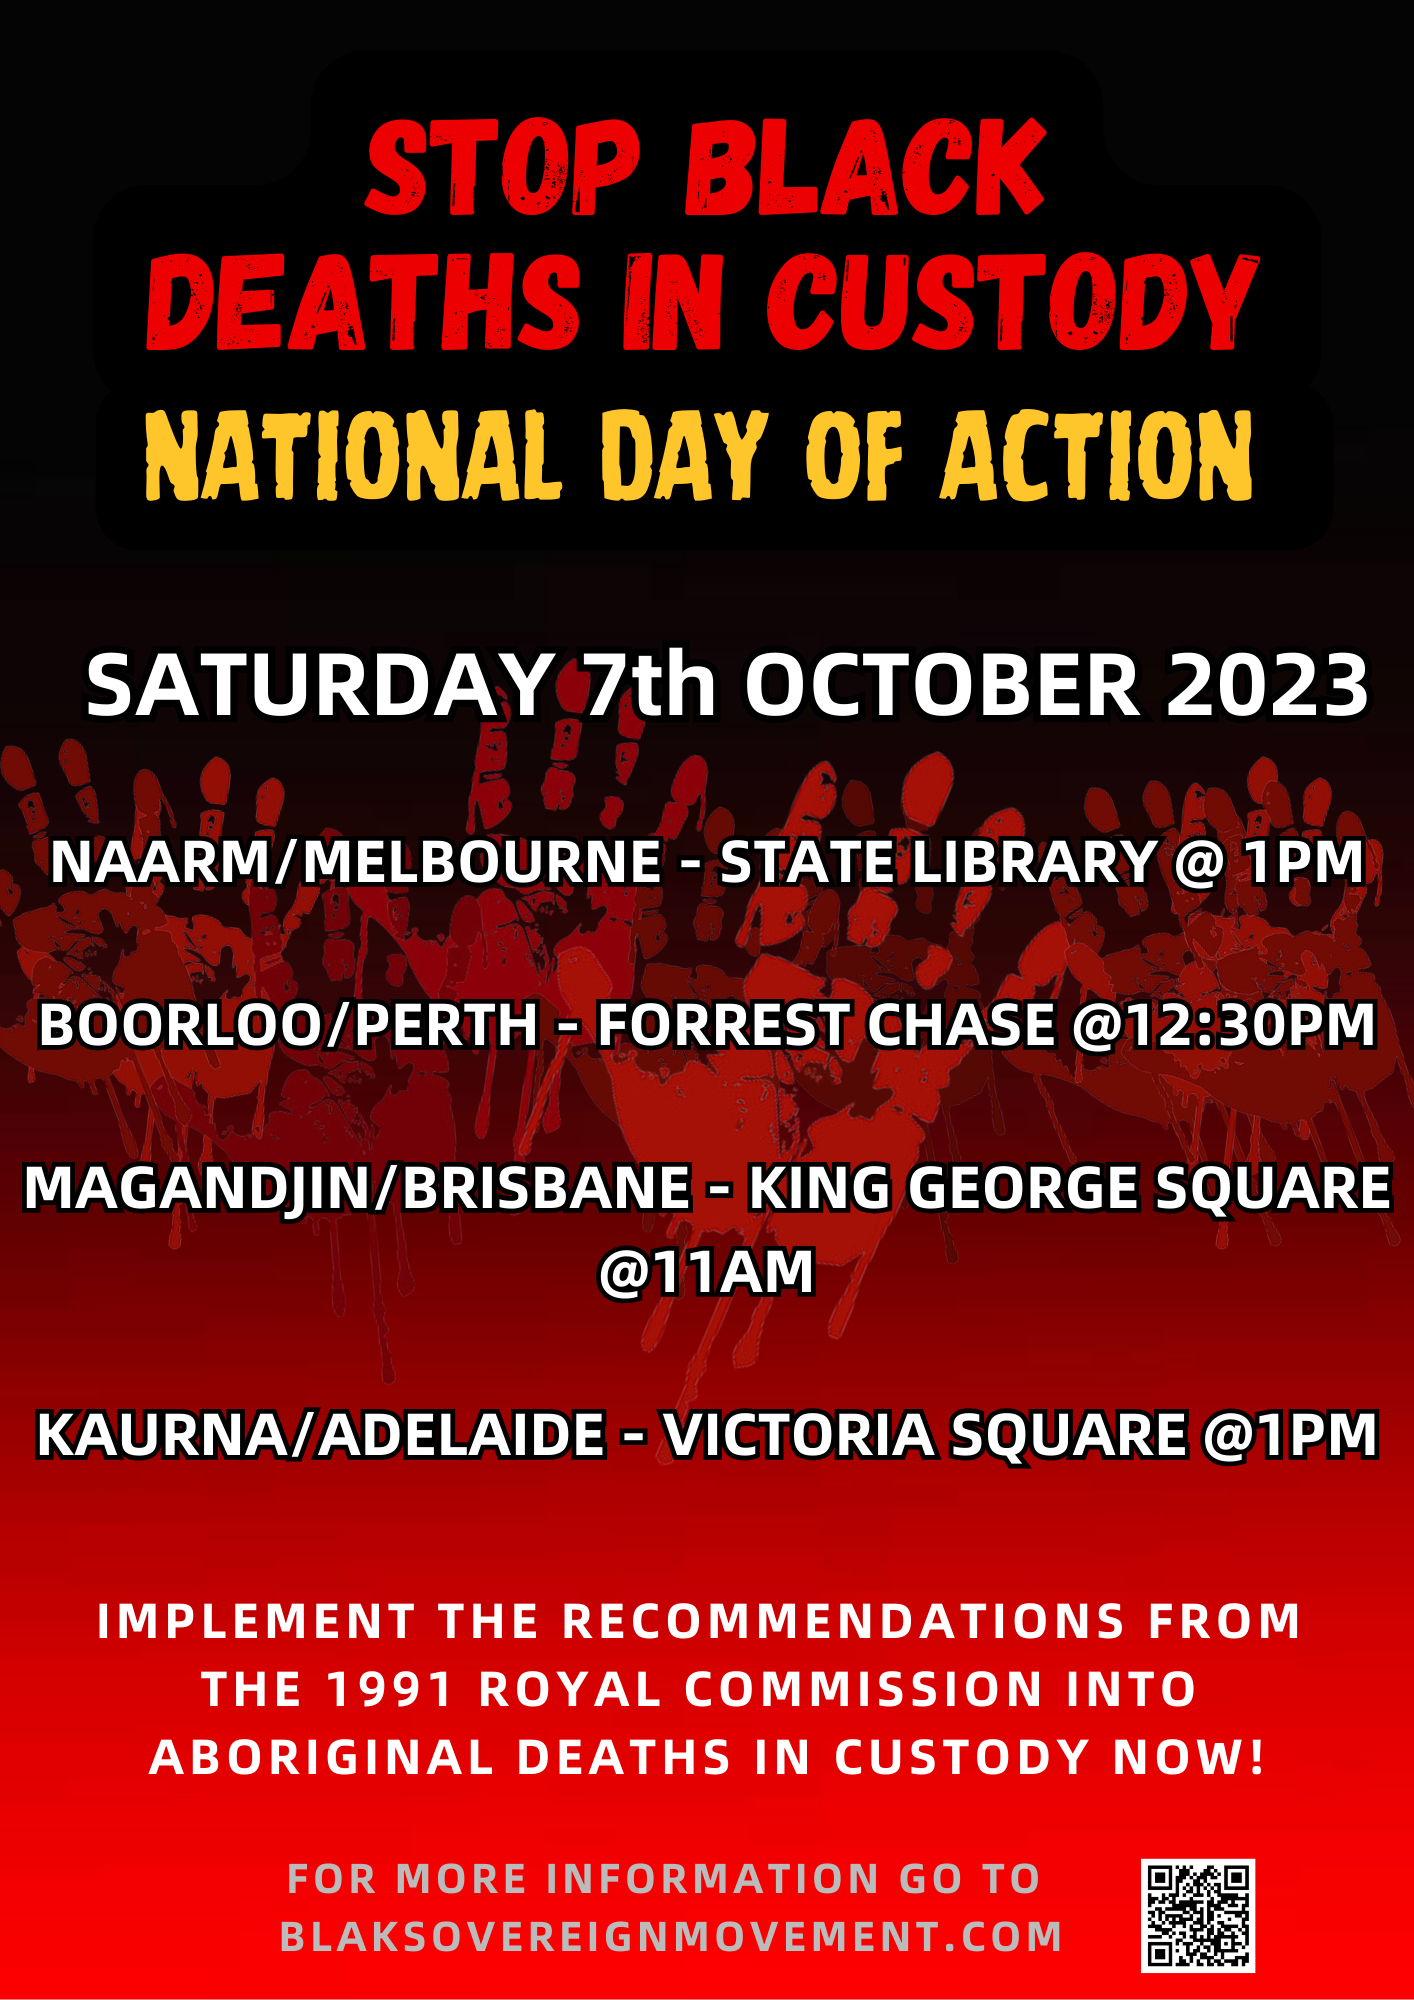 A poster advertising a nationwide rally to Stop Black Deaths in Custody on Saturday the 7th of October, with details for Melbourne (outside State Library at 1PM), Perth (King George Square at 11AM) and Brisbane (Victoria Square at 1PM).